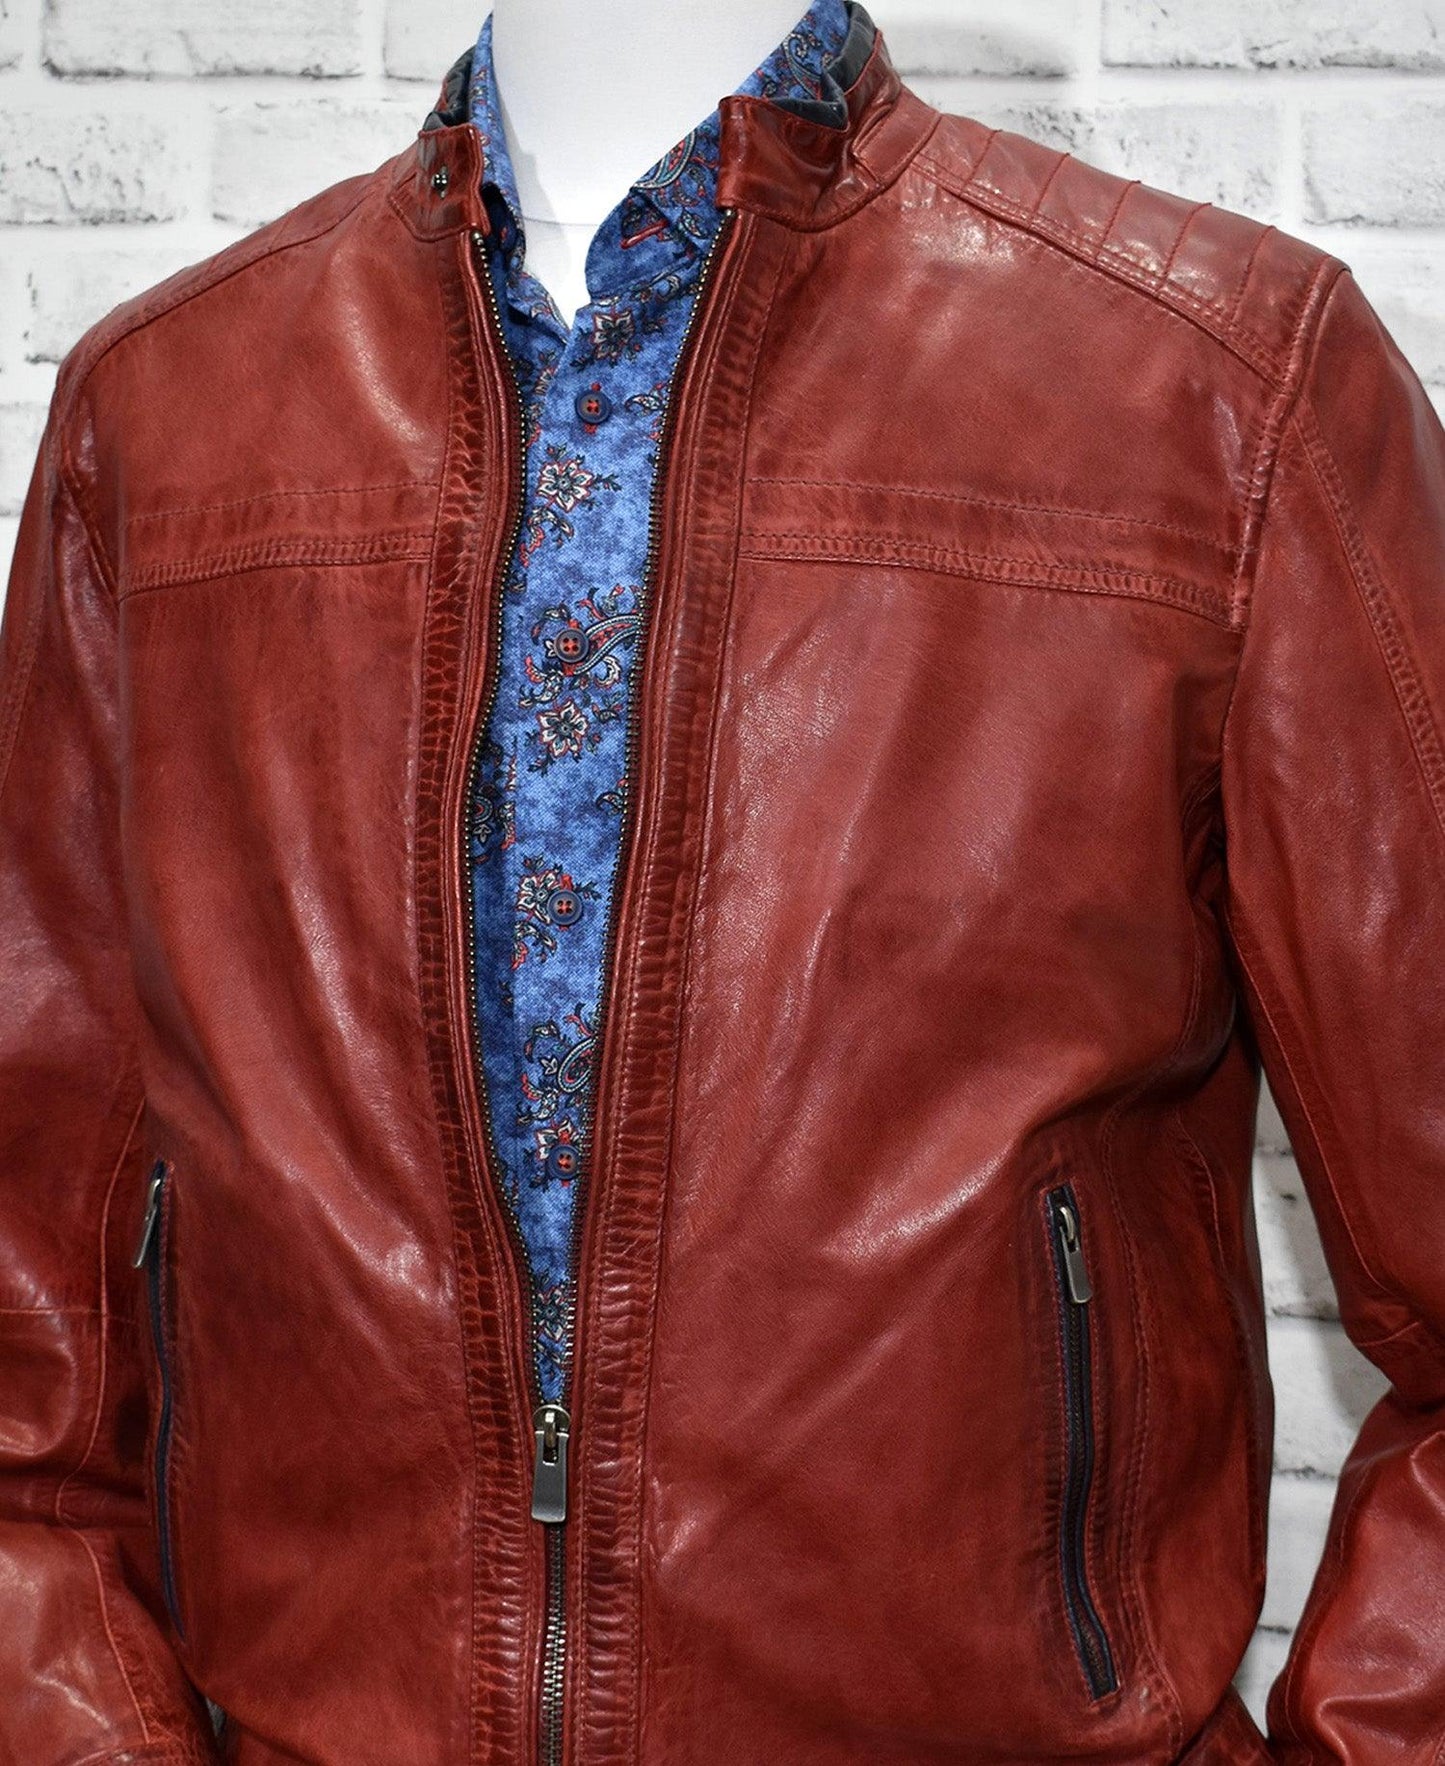 Soft washed, nappa leather in fashion red. Multi stitch detailing and contrast leather trim. Zip side pockets, classic inside chest pocket. Trend stand up collar. Biker model is best suited for a slim to medium build.